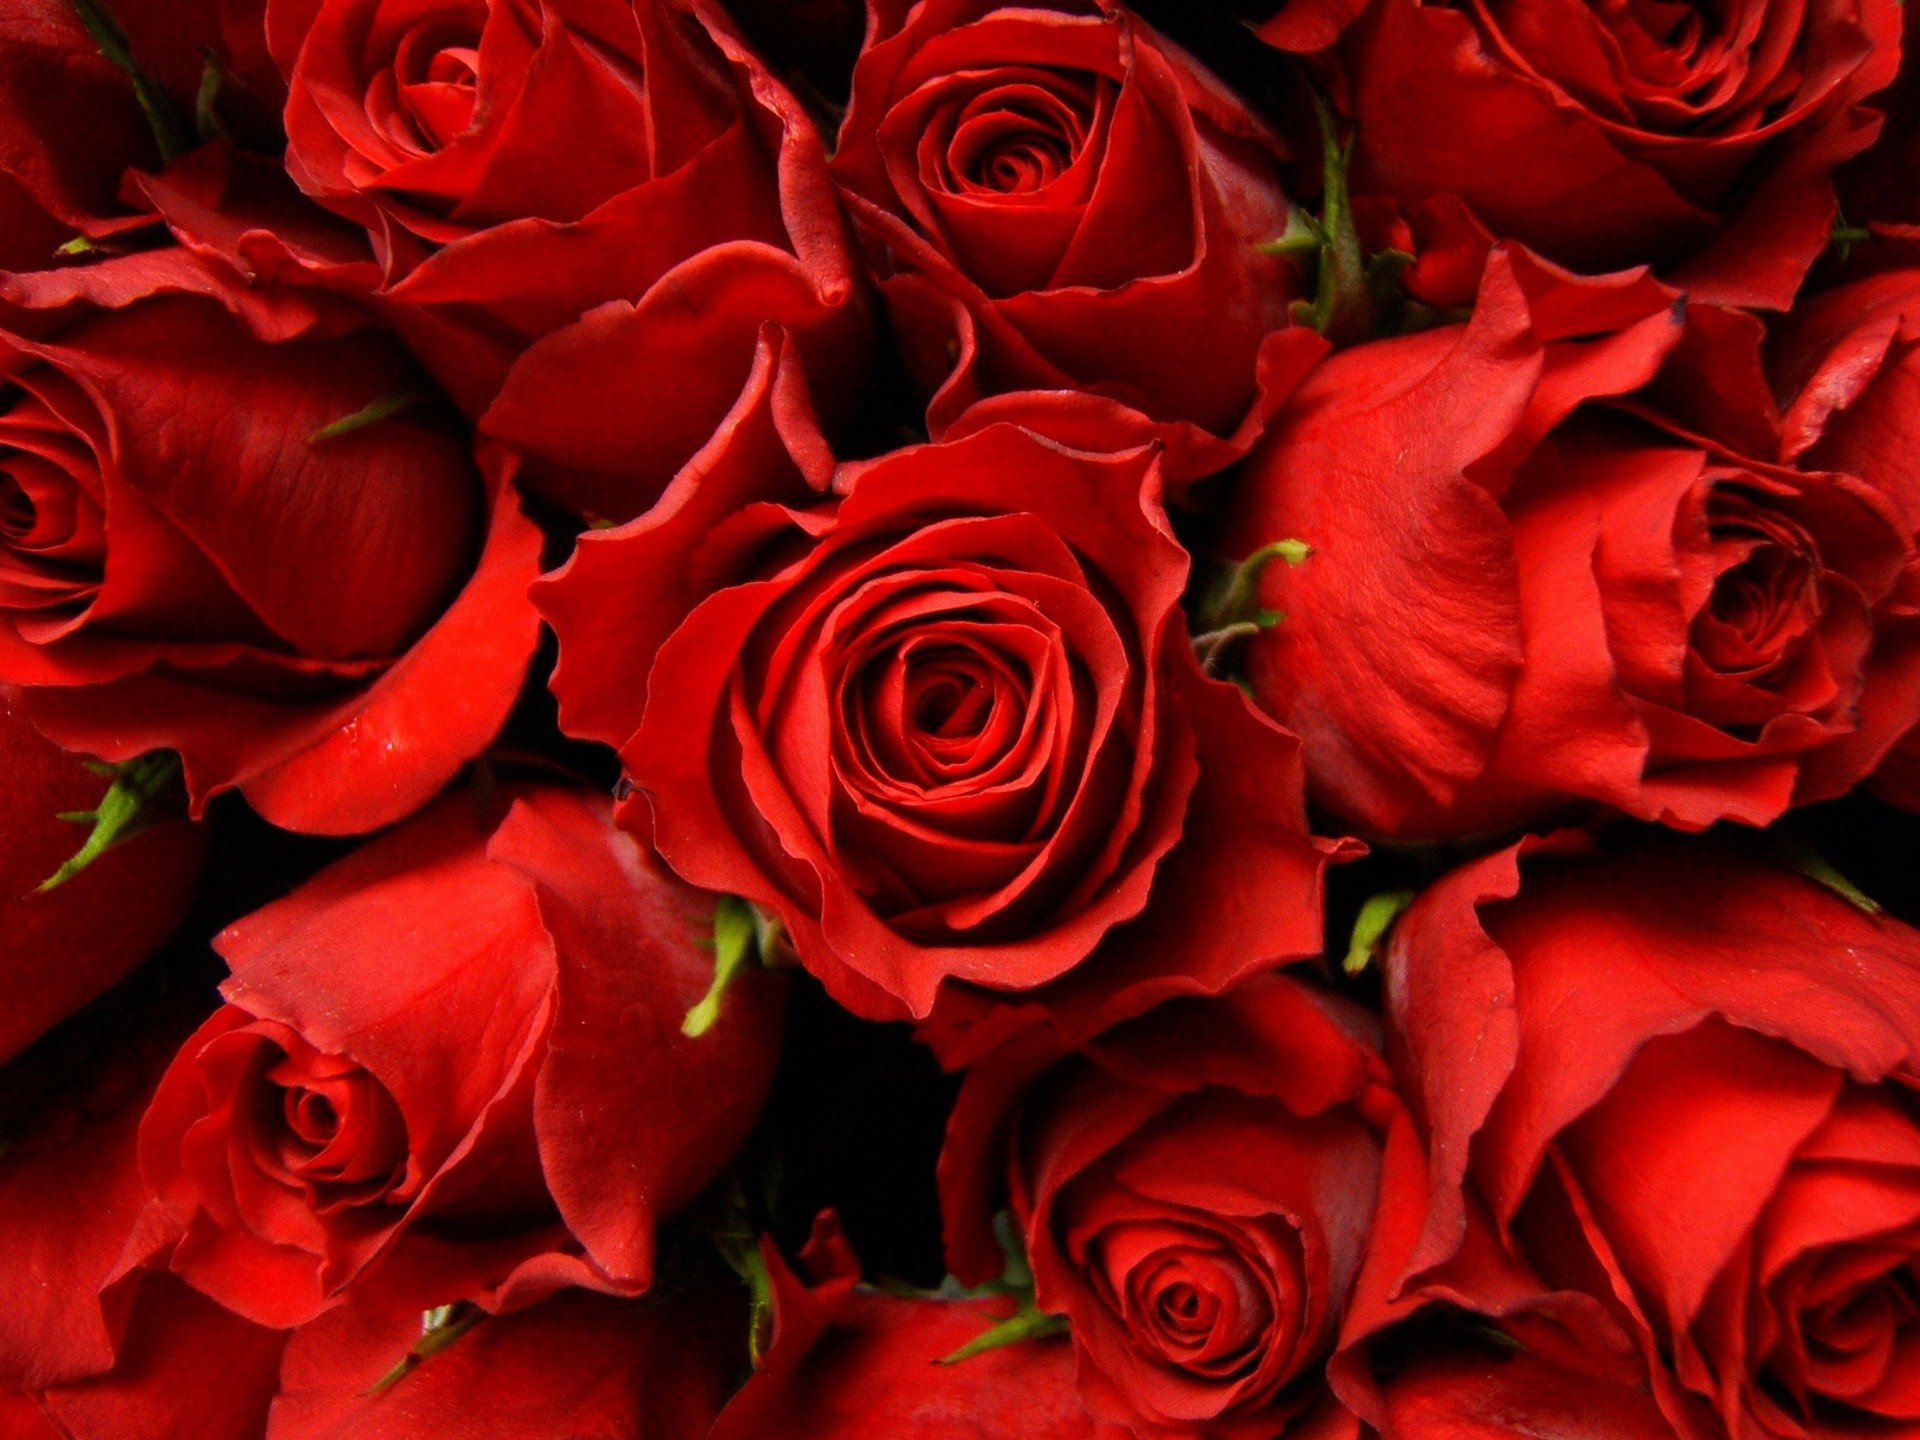 1920x1440 Red Roses Picture - Wallpaper, High Definition, High Quality